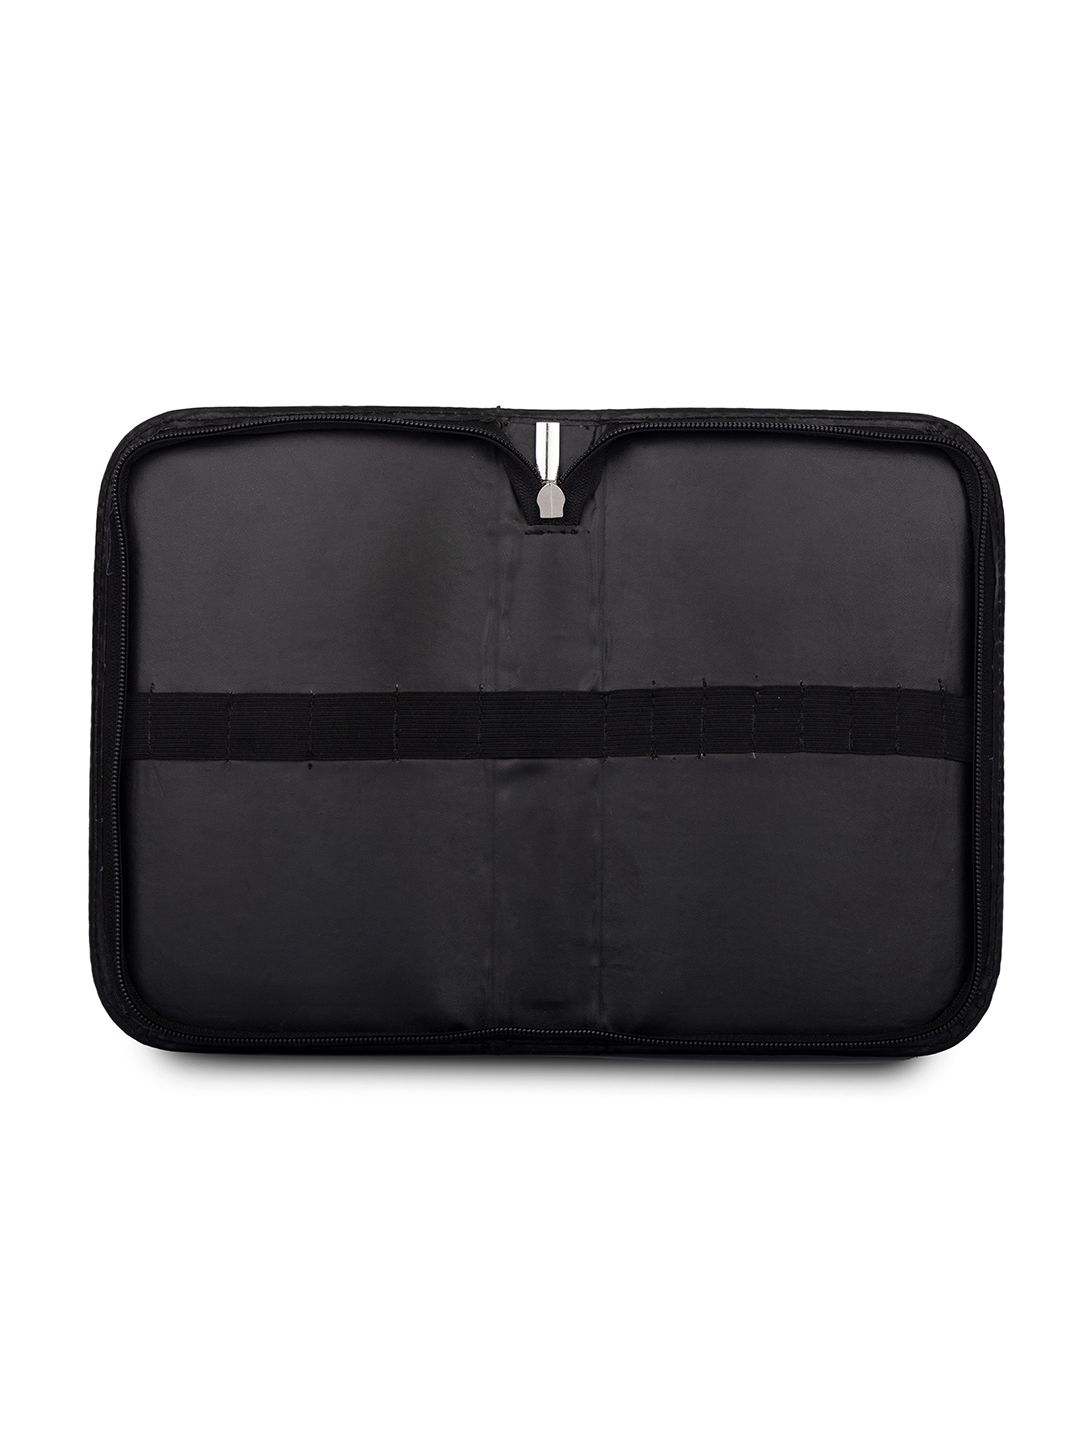 LONDONPRIME Woman Black Solid Makeup Brush Pouch Organiser Price in India